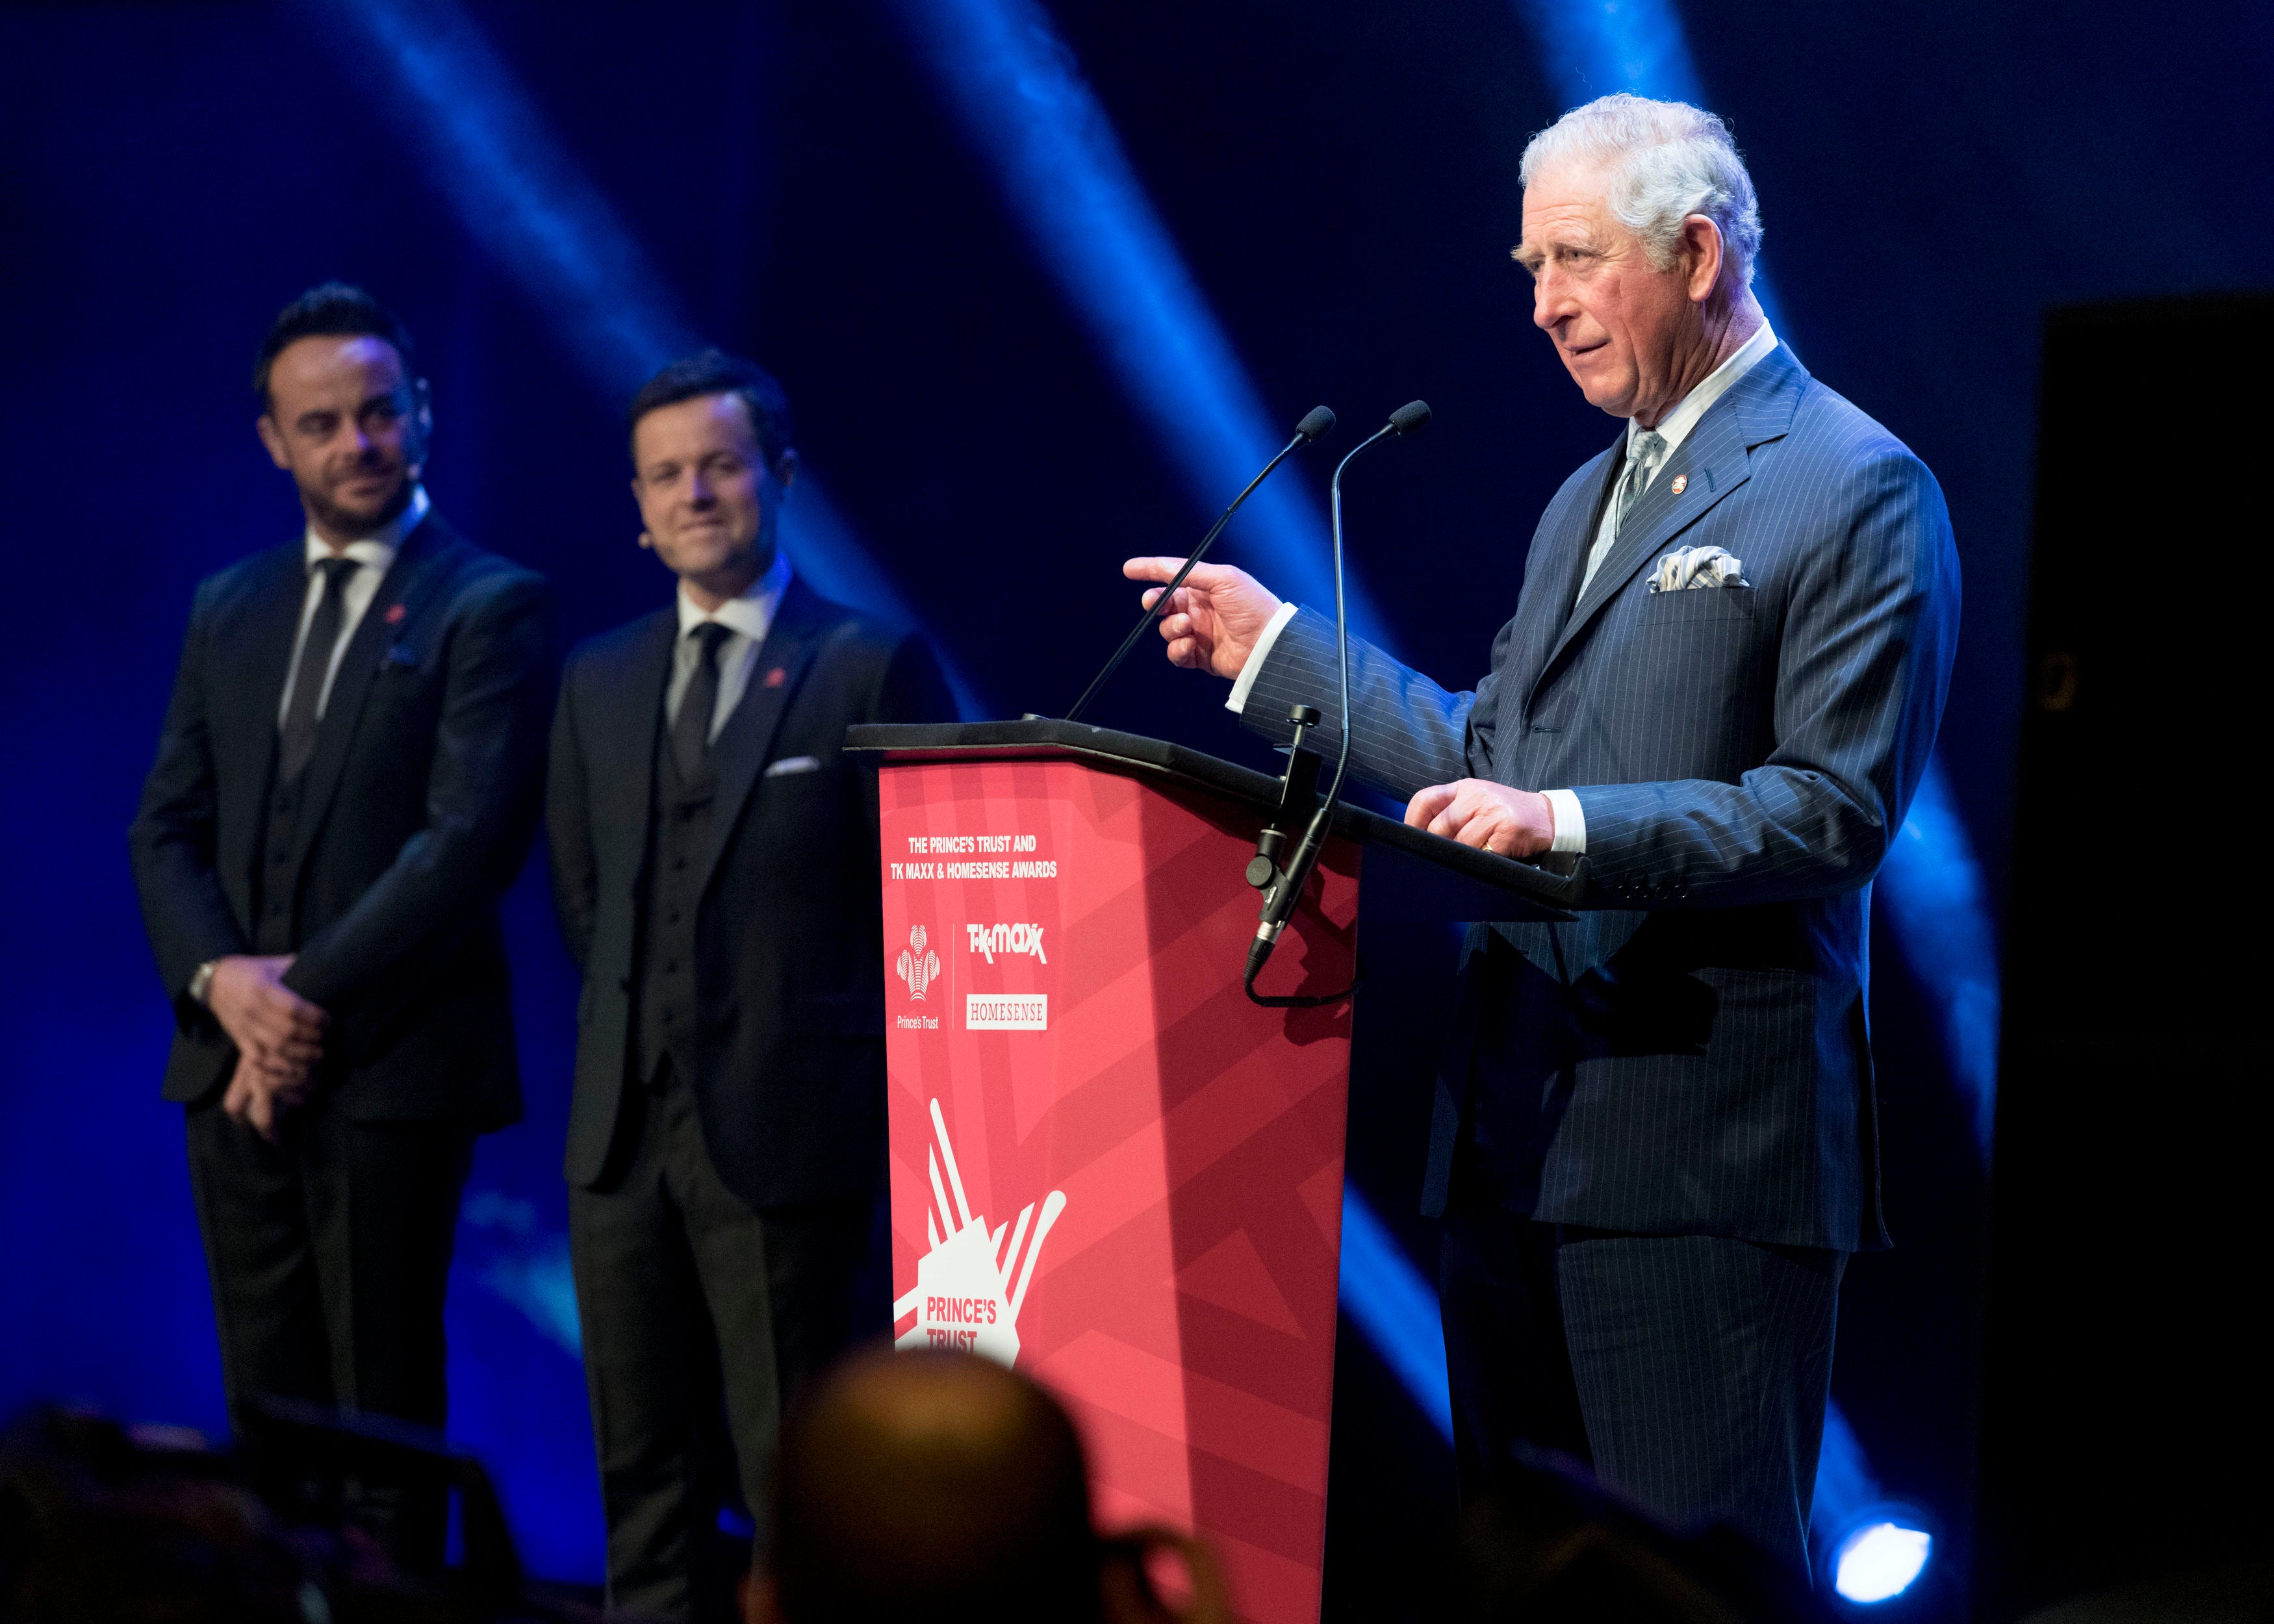 The Prince of Wales on stage with hosts Anthony Ant McPartlin and Declan Donnelly at the Prince’s Trust Awards at the London Palladium (Geoff Pugh/The Daily Telegraph/PA)